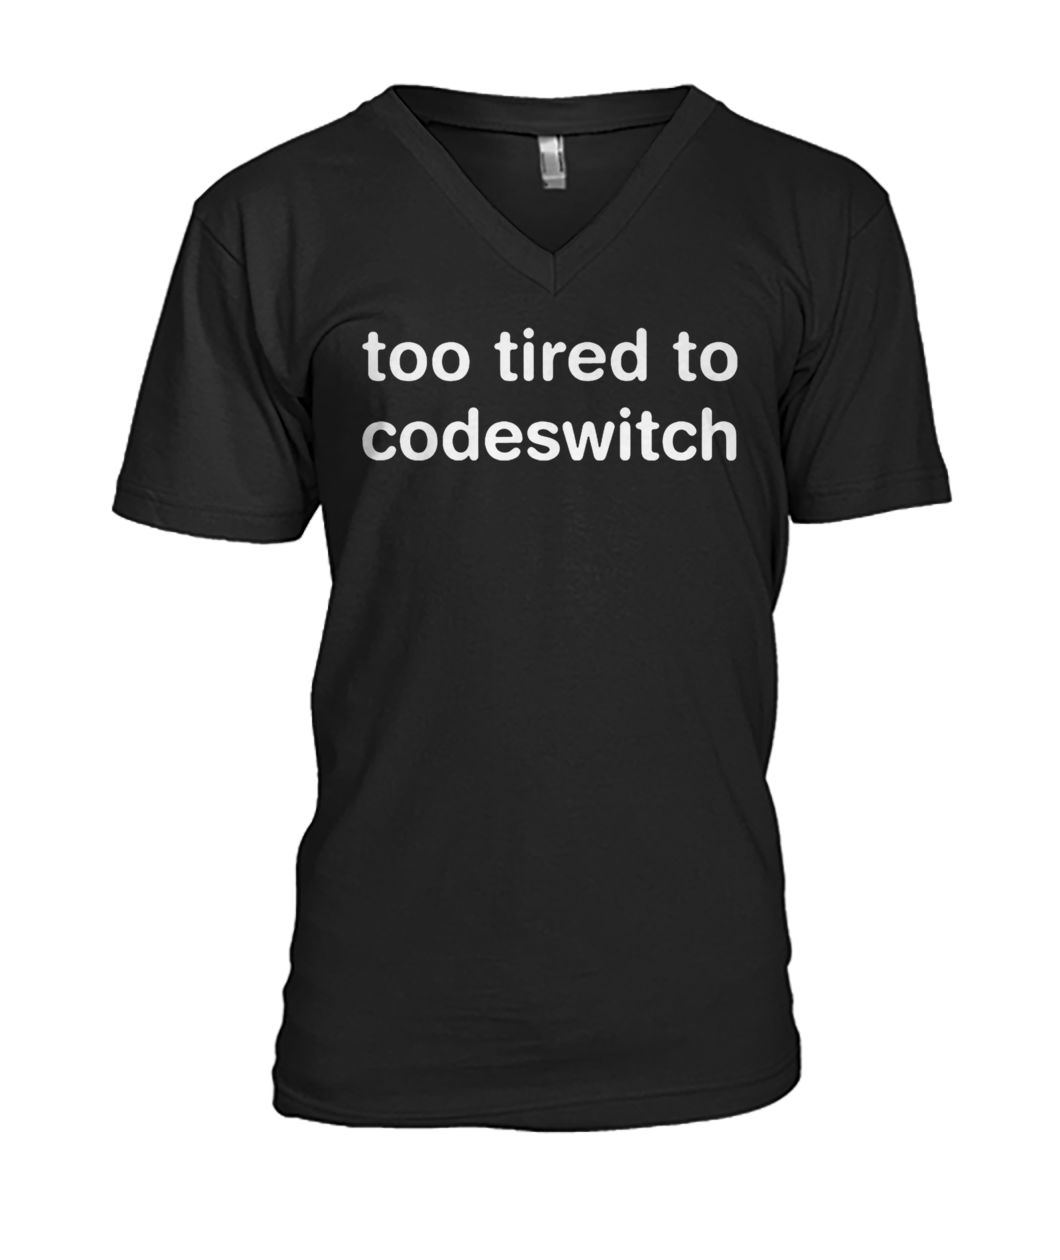 Too tired to codeswitch mens v-neck